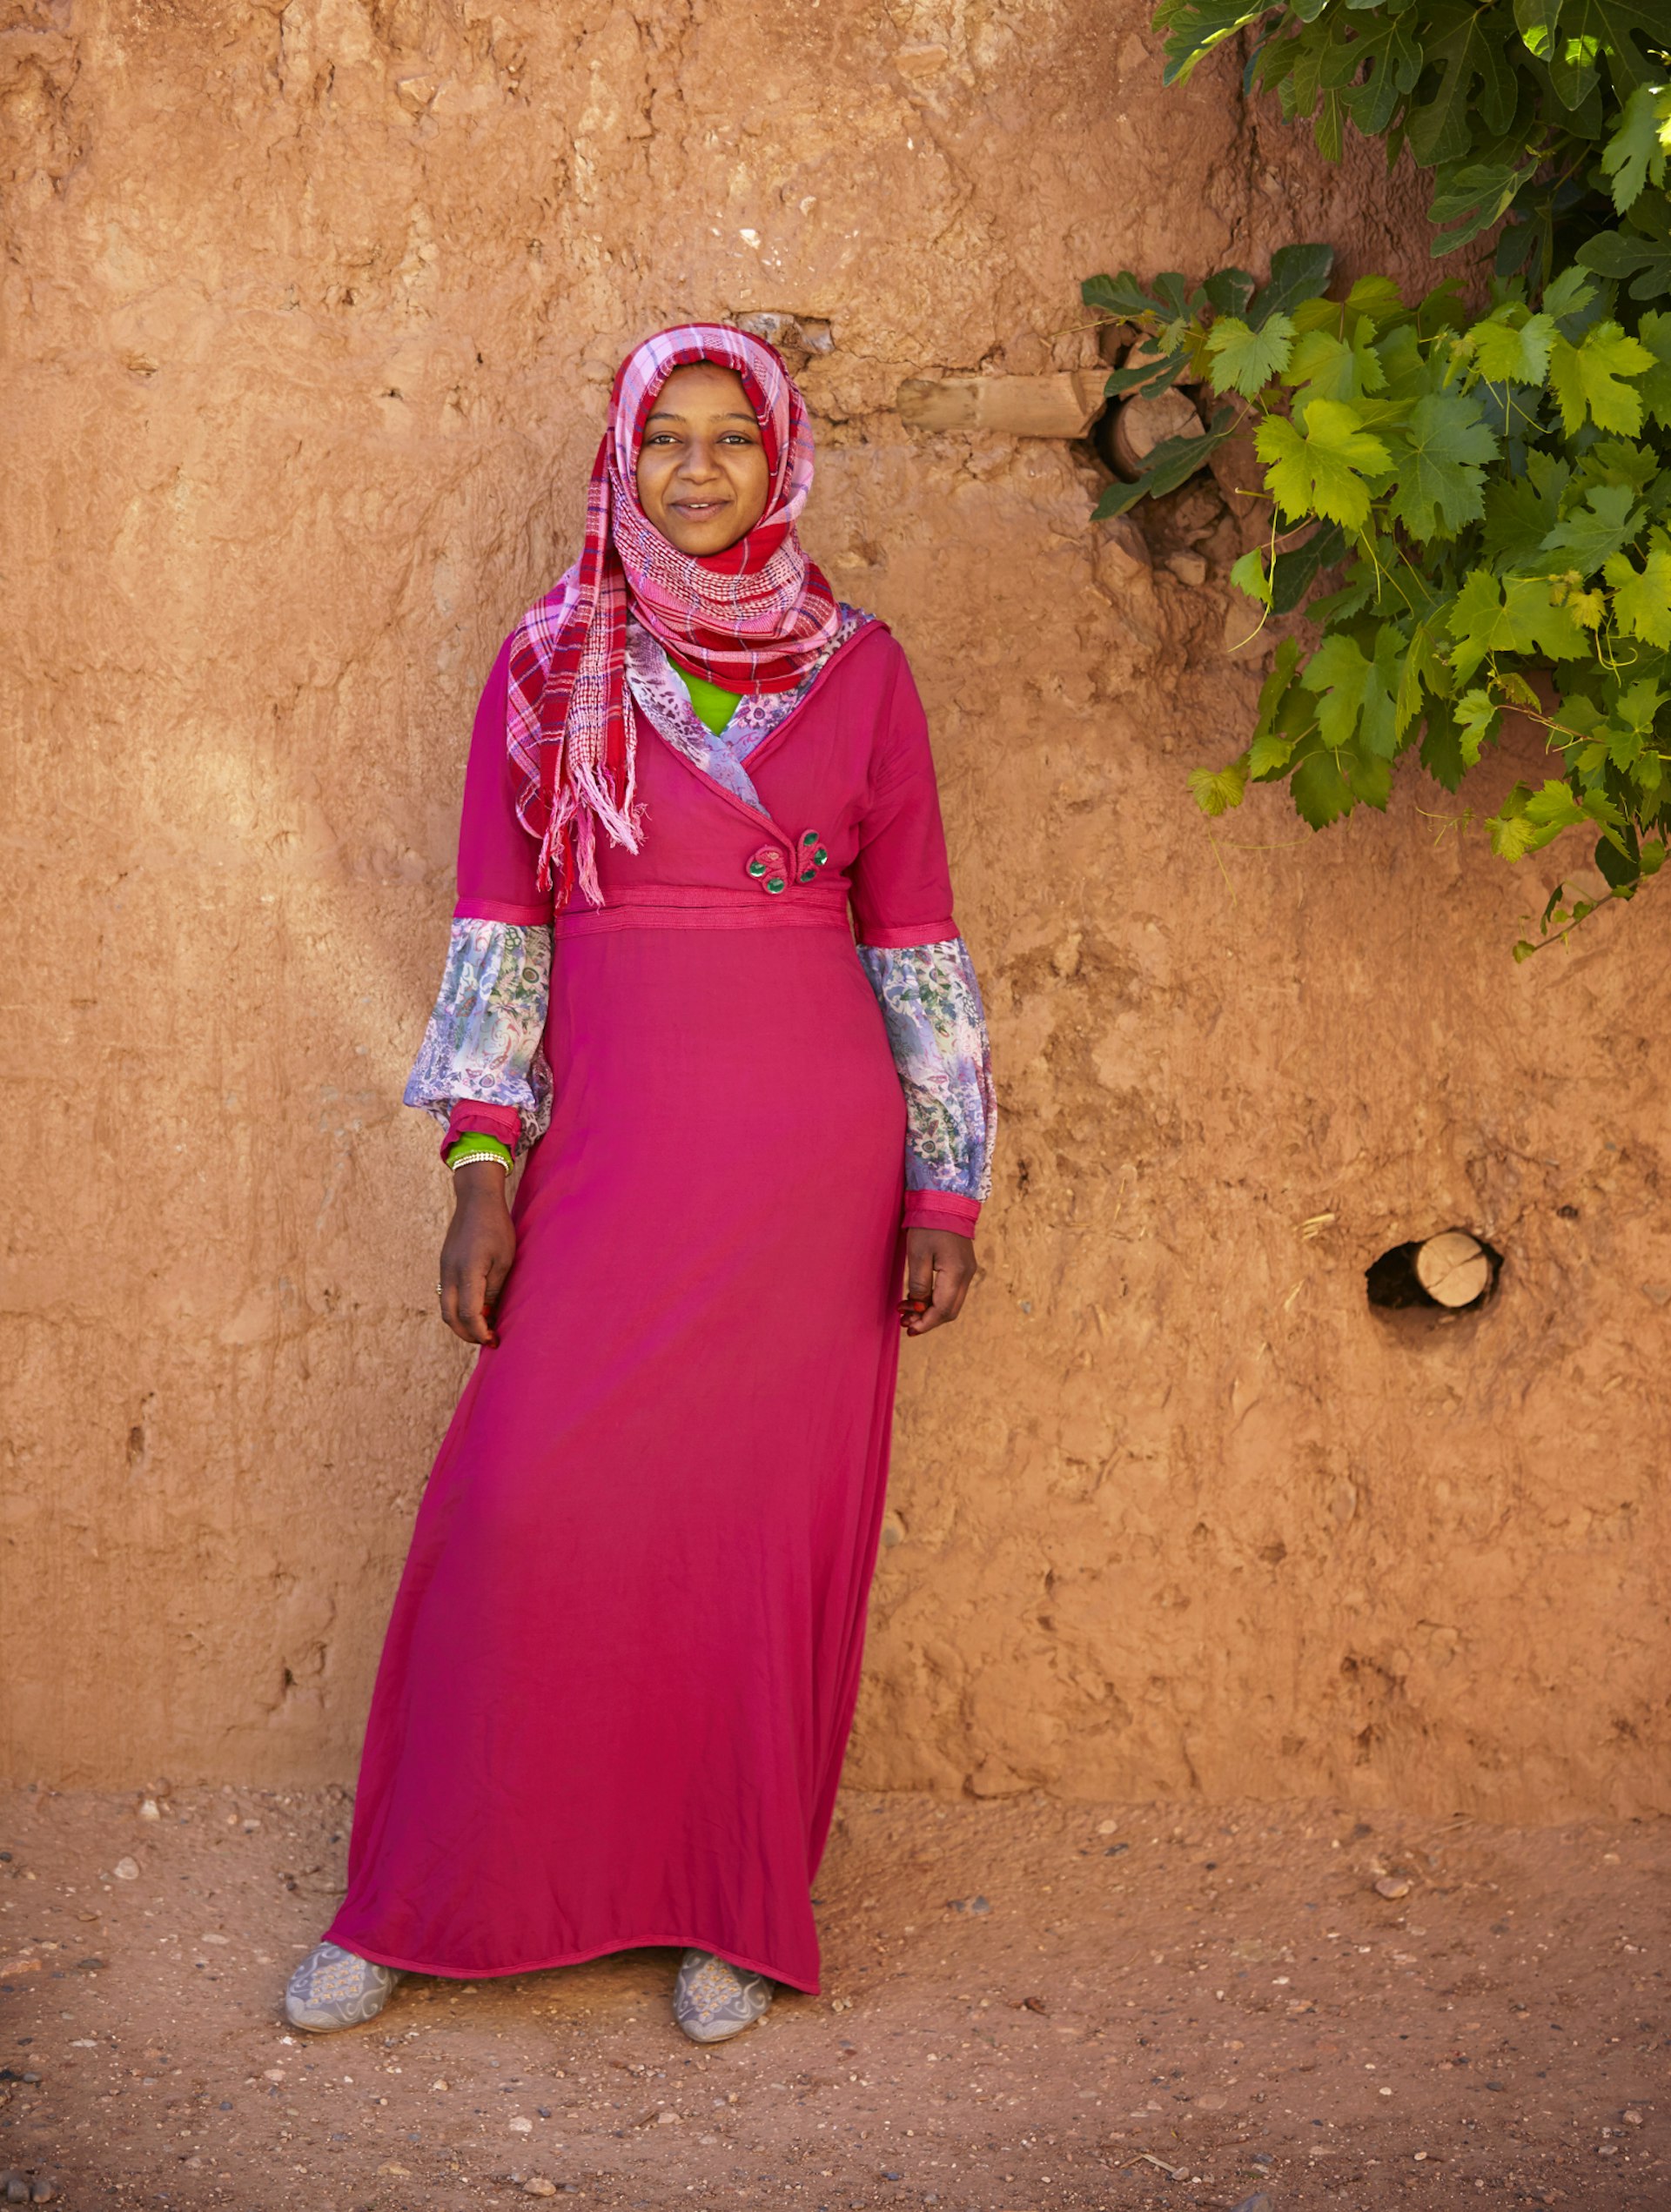 Niama Mansouri, a young member of Hdida's rose-growing co-operative in Morocco